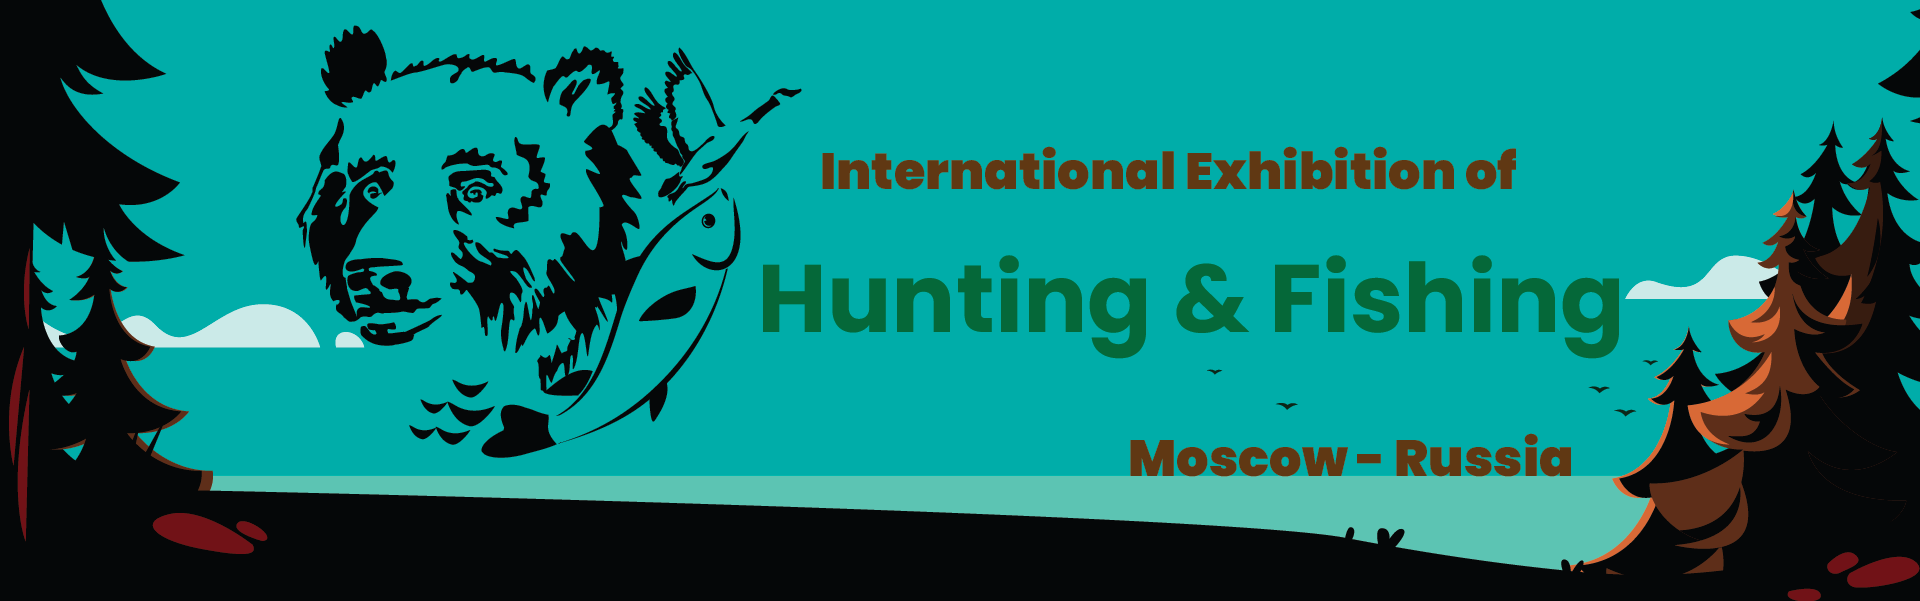 Hunting and Fishing Exhibition Moscow Russia